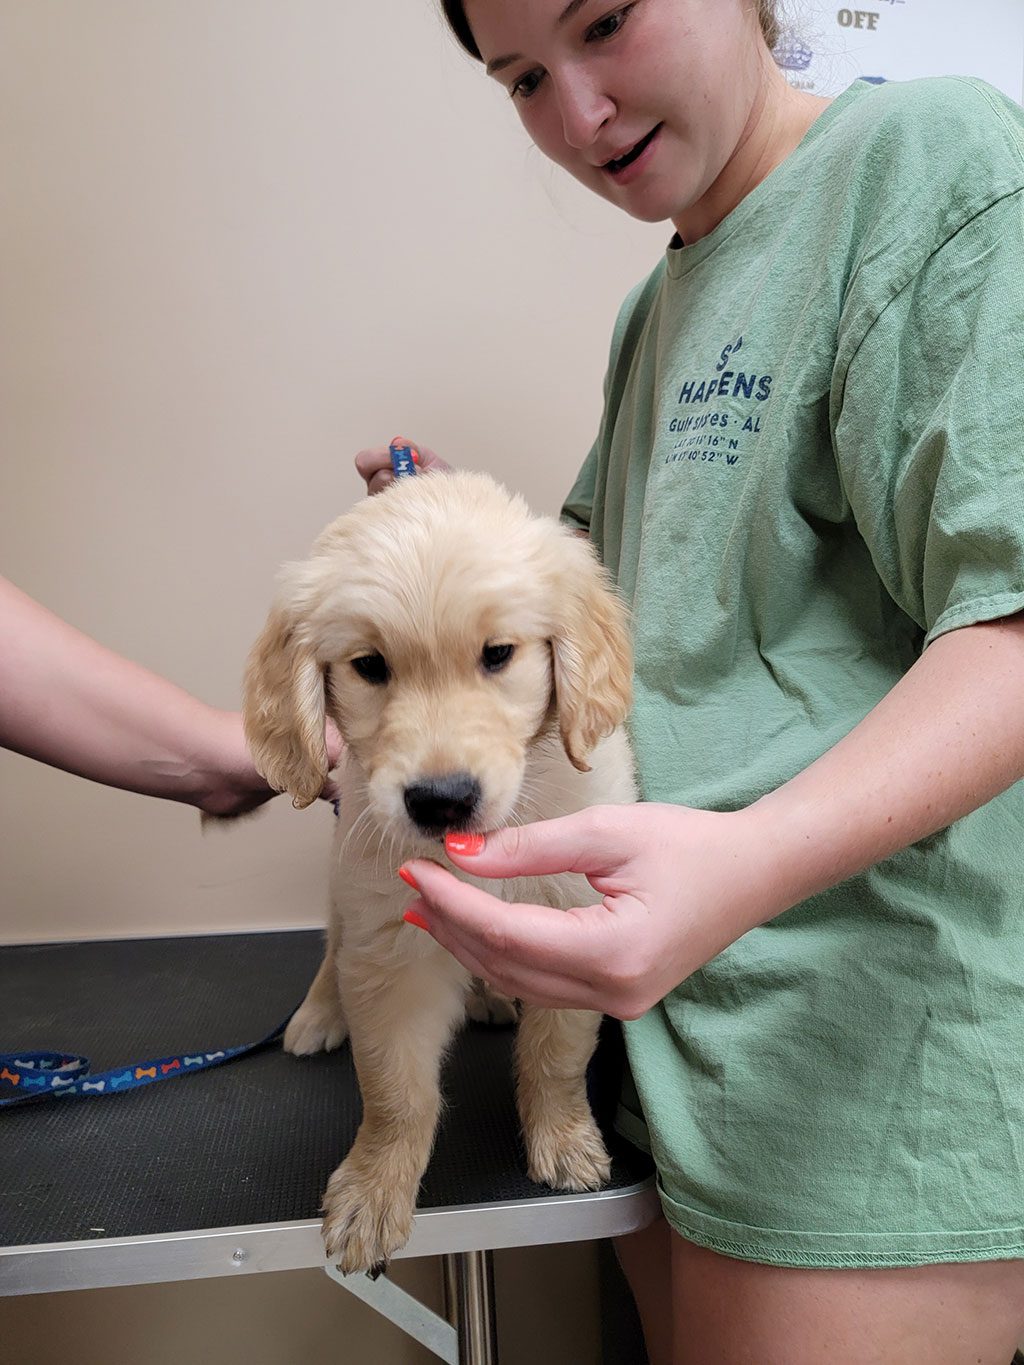 Our volunteers love helping groom our pups-in-training!